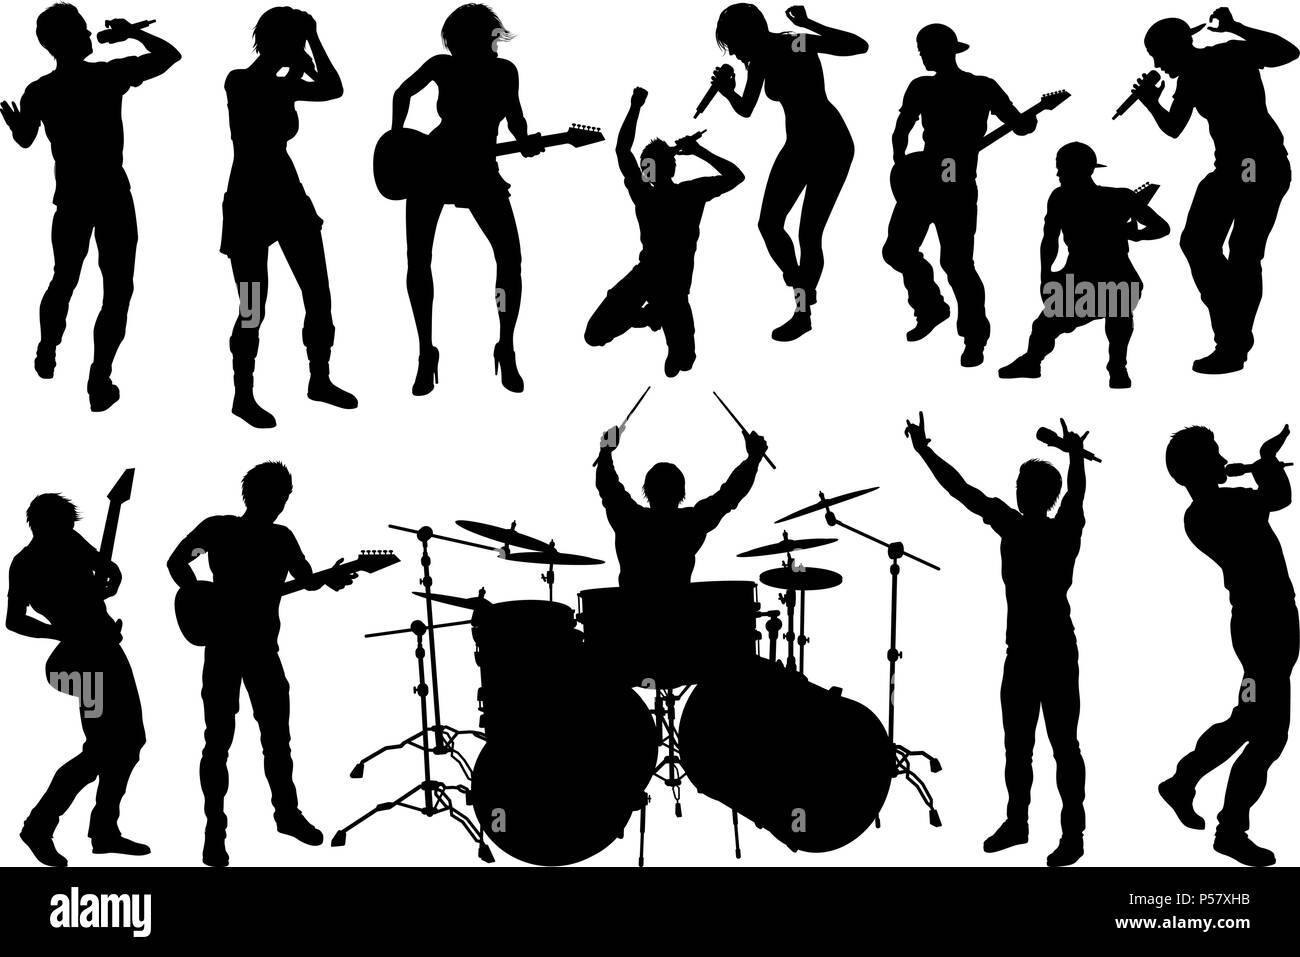 Musician Group Silhouettes Stock Vector